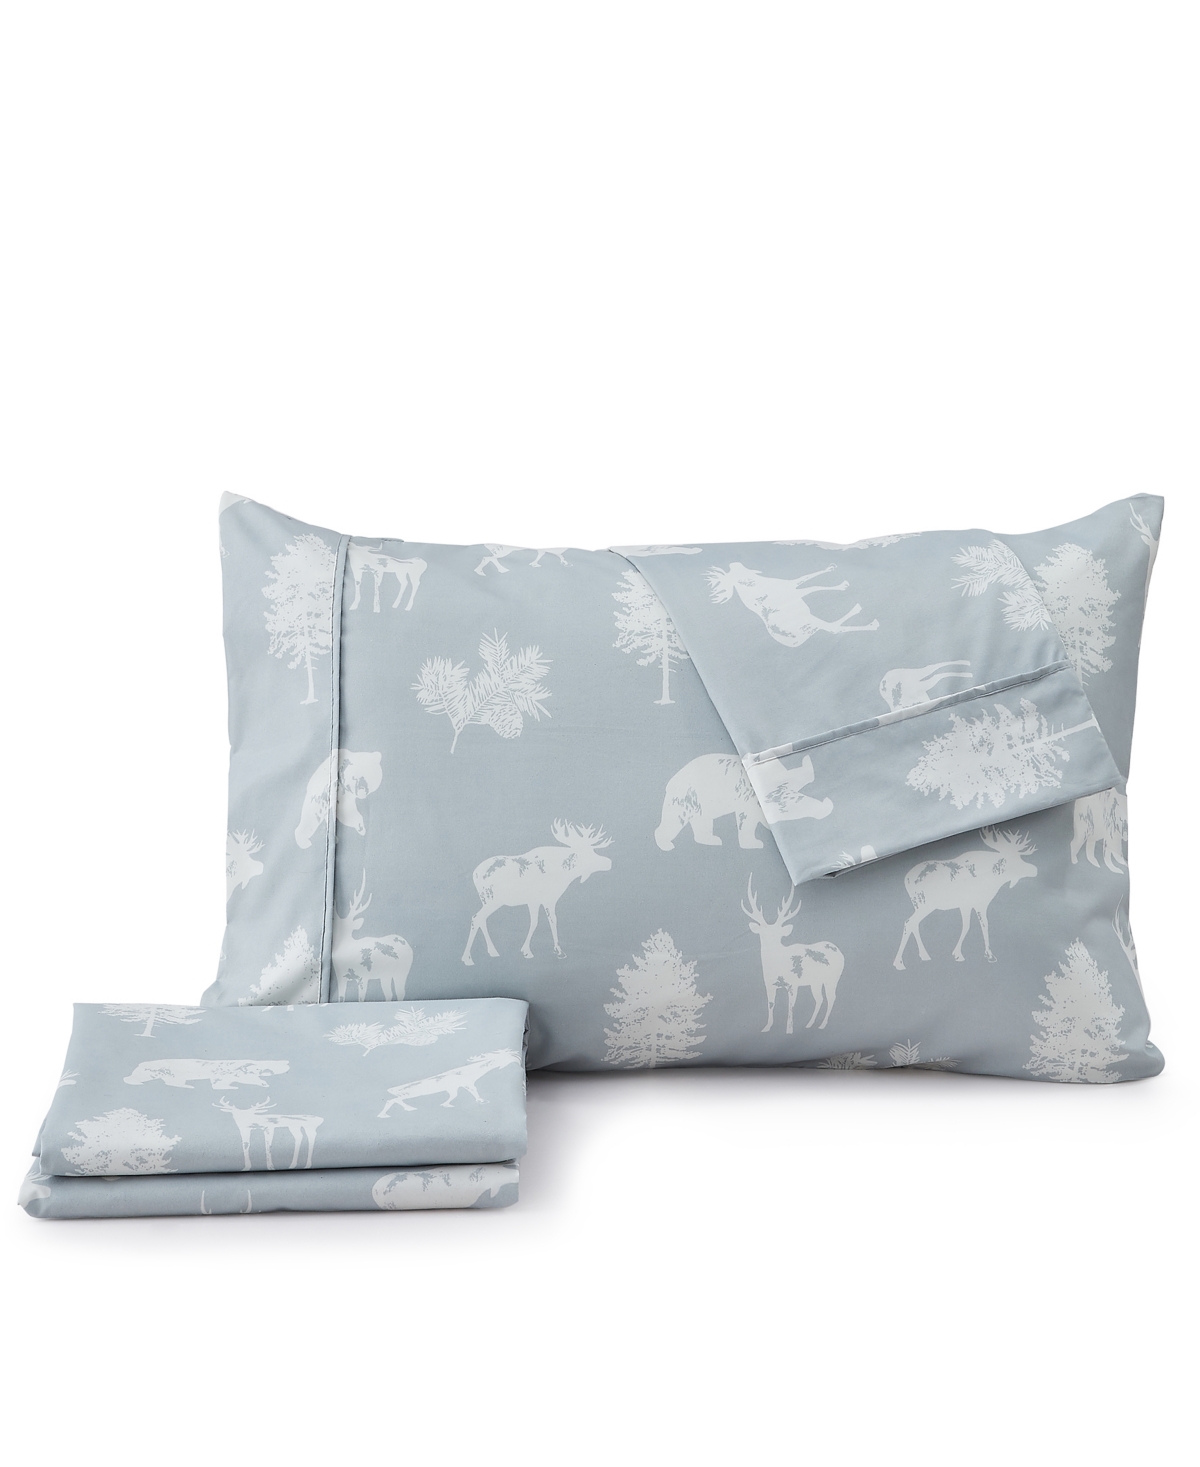 Shop Premium Comforts Rustic Lodge Printed Microfiber 4 Piece Sheet Set, Queen In Lodge - Forest Animal - Light Gray